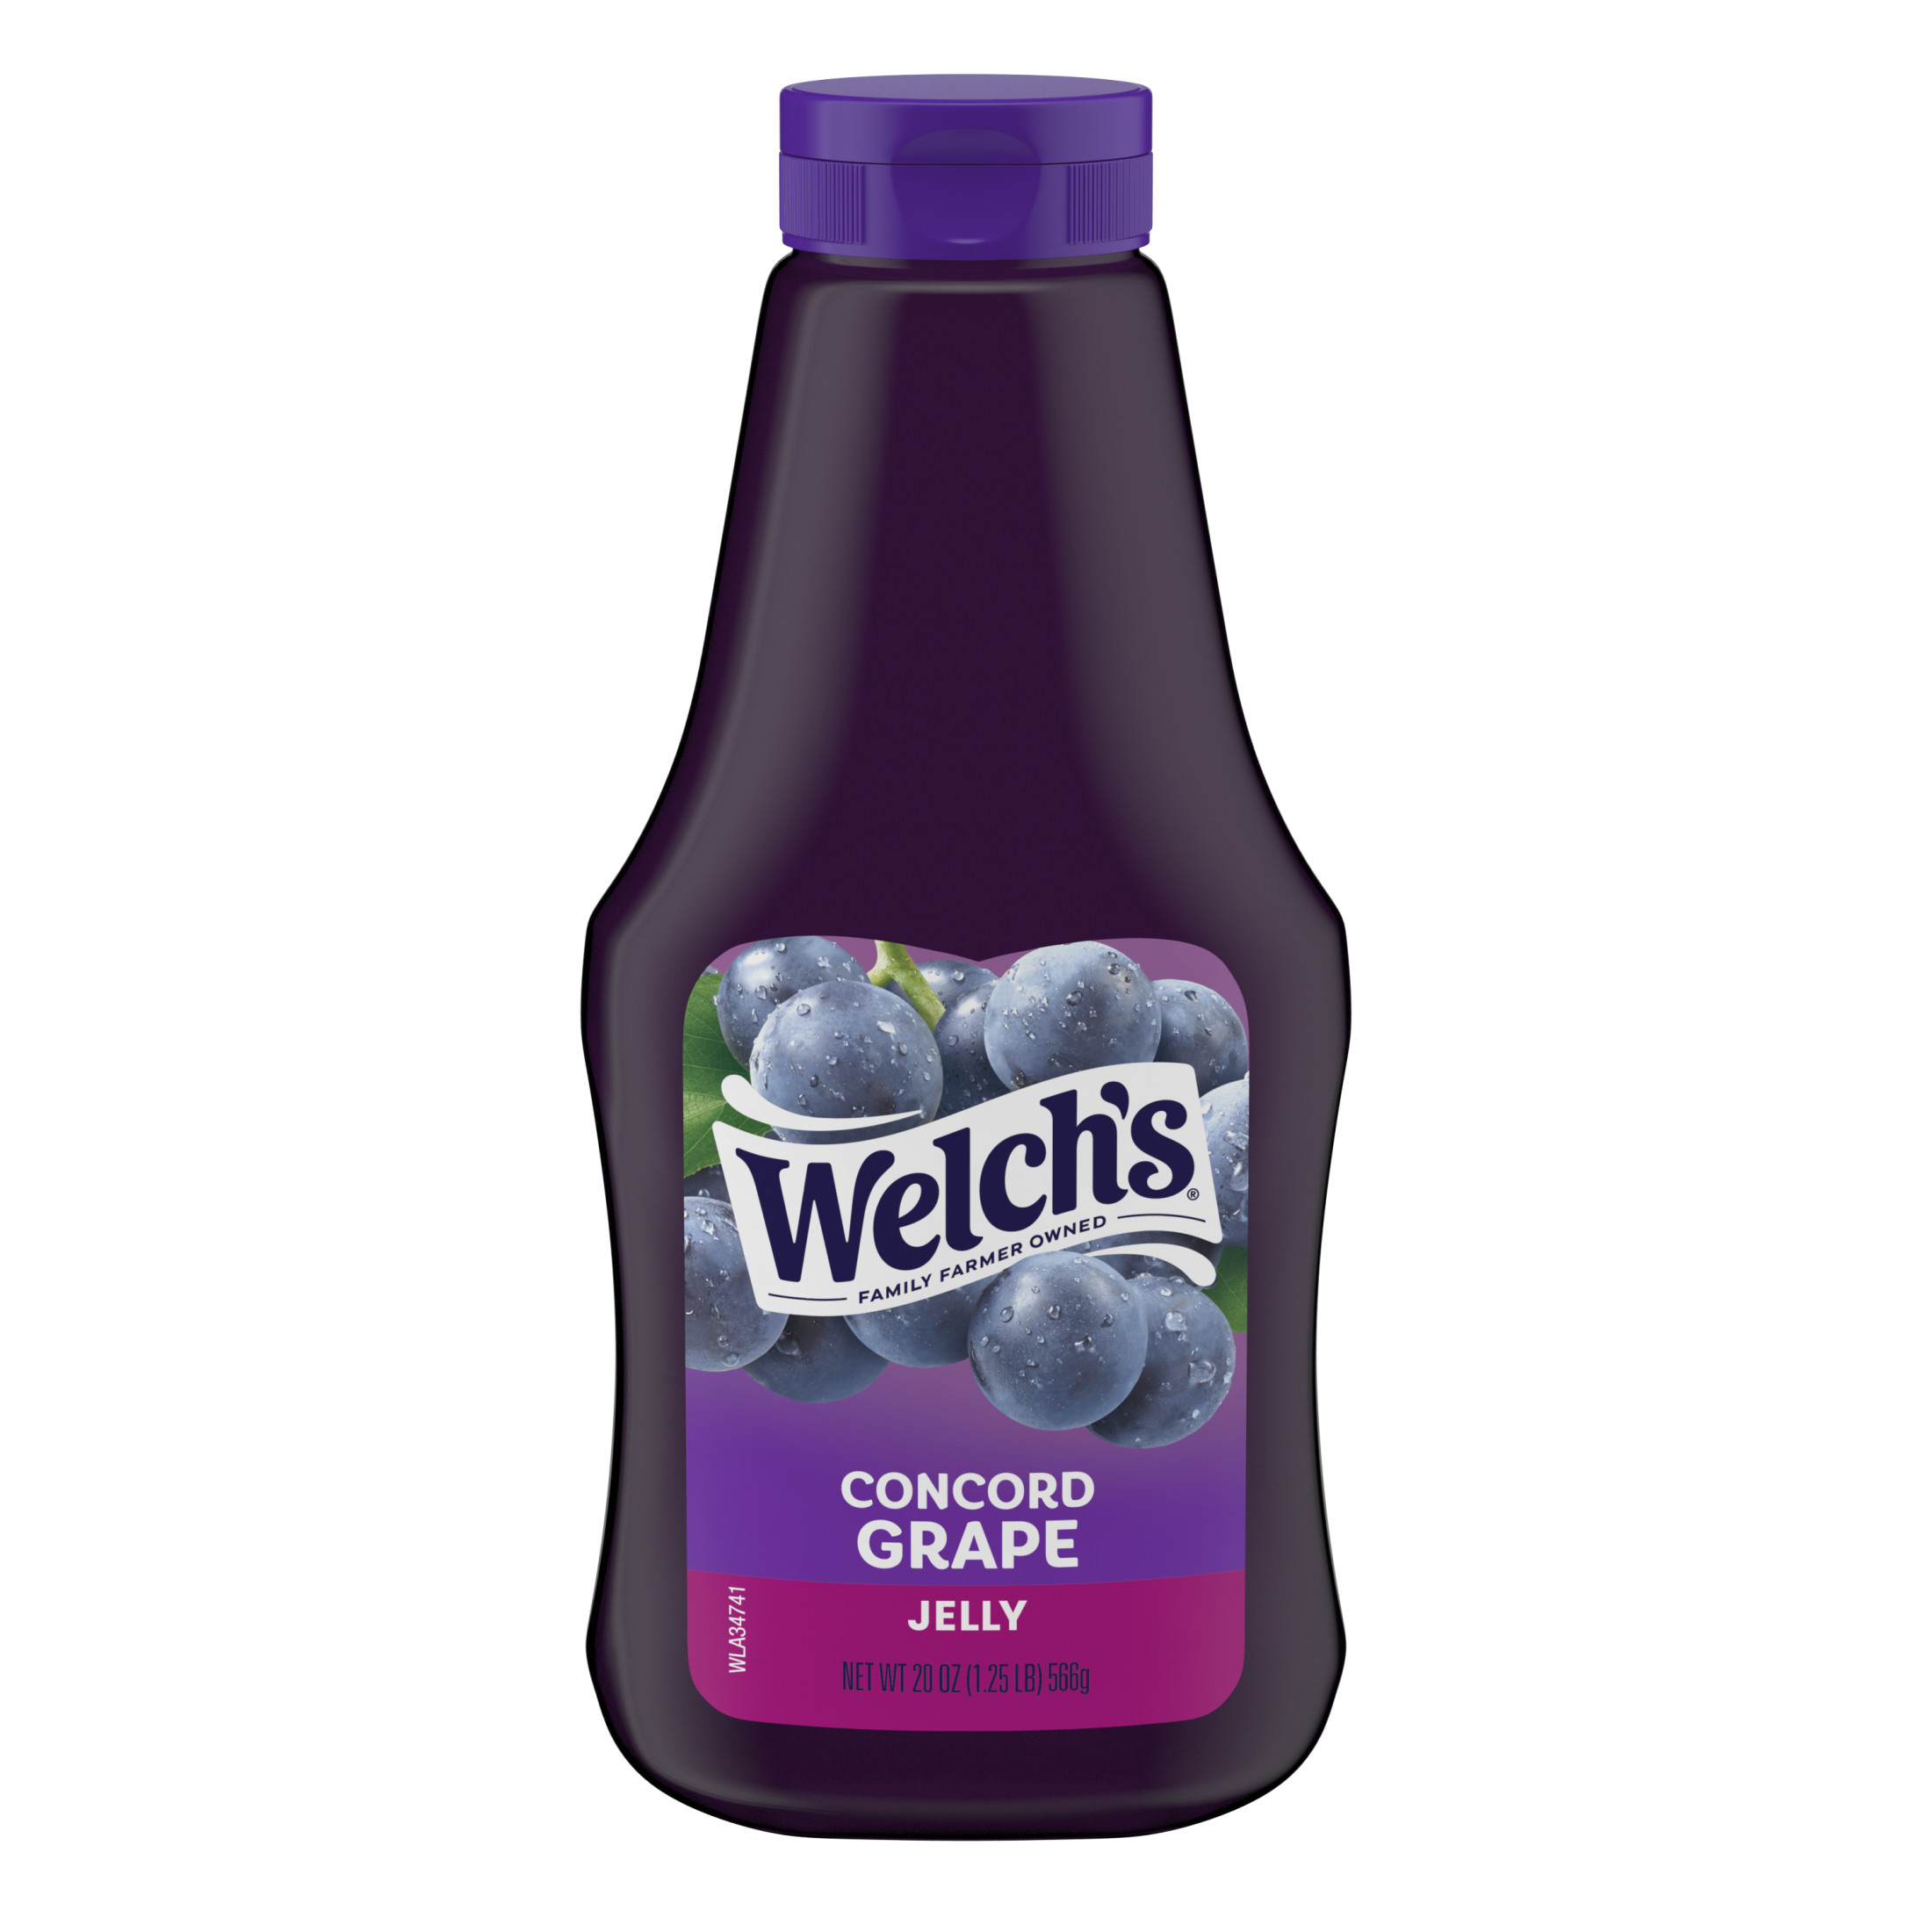 Welch's Concord Grape Jelly, 20 oz Squeeze Bottle - image 1 of 6